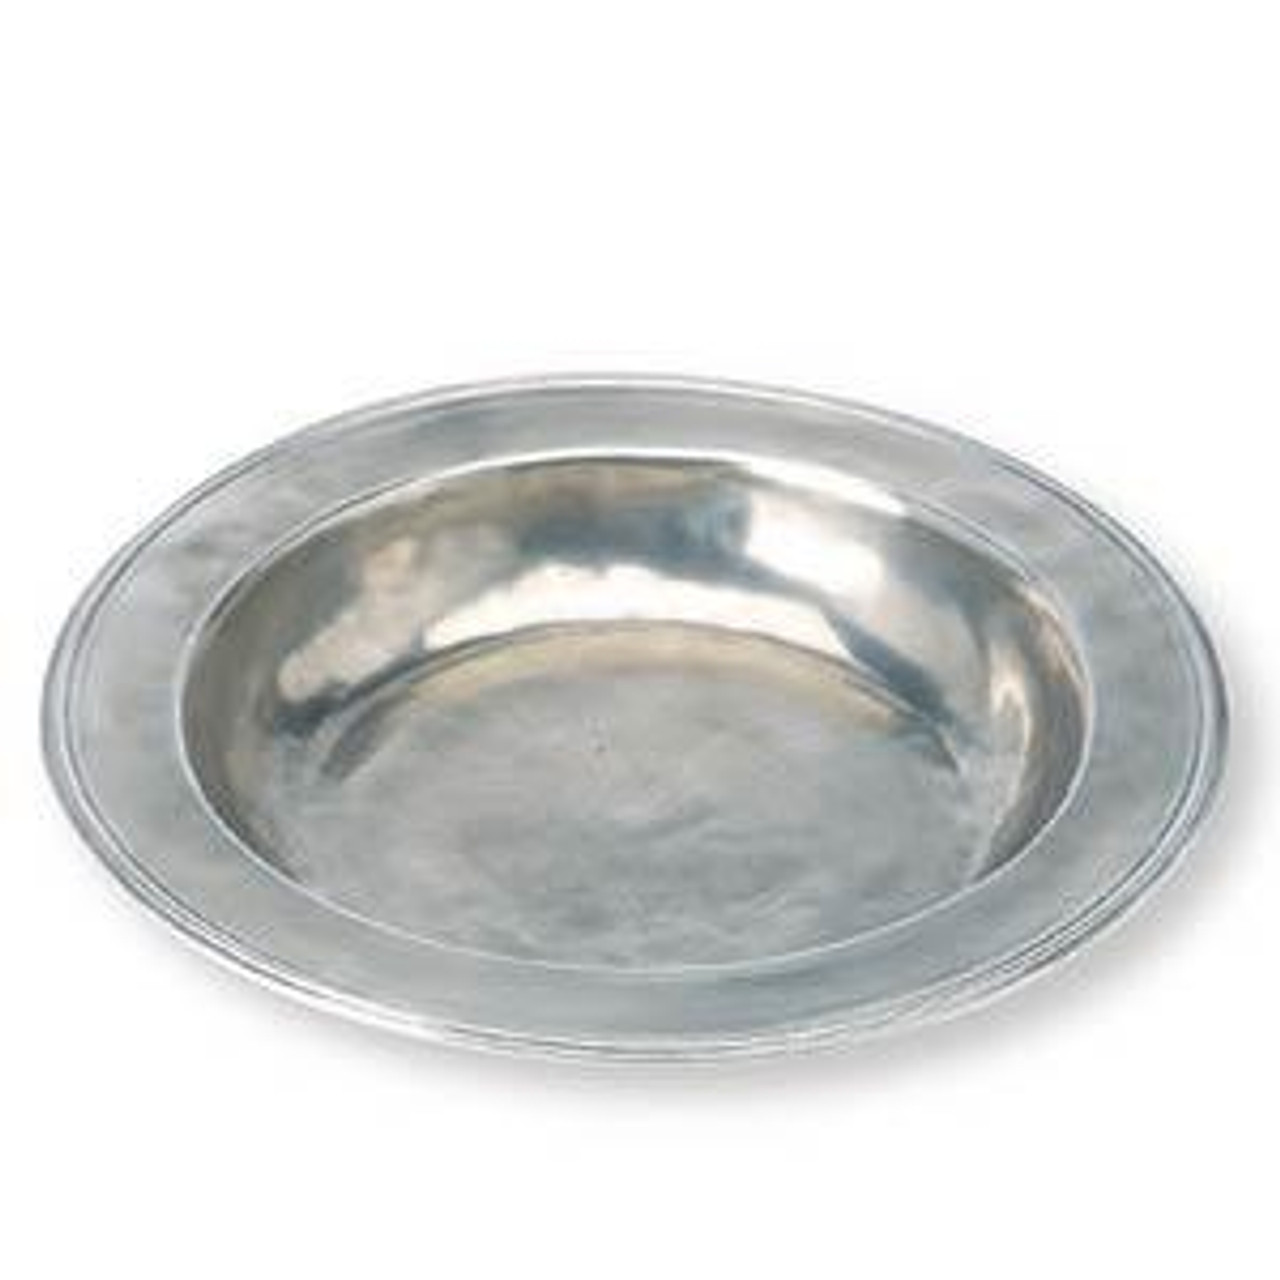 https://cdn11.bigcommerce.com/s-e0xlh4avpe/images/stencil/1280x1280/products/104156/137575/match-italian-pewter-round-serving-bowl-large-26__11042.1650937518.jpg?c=1